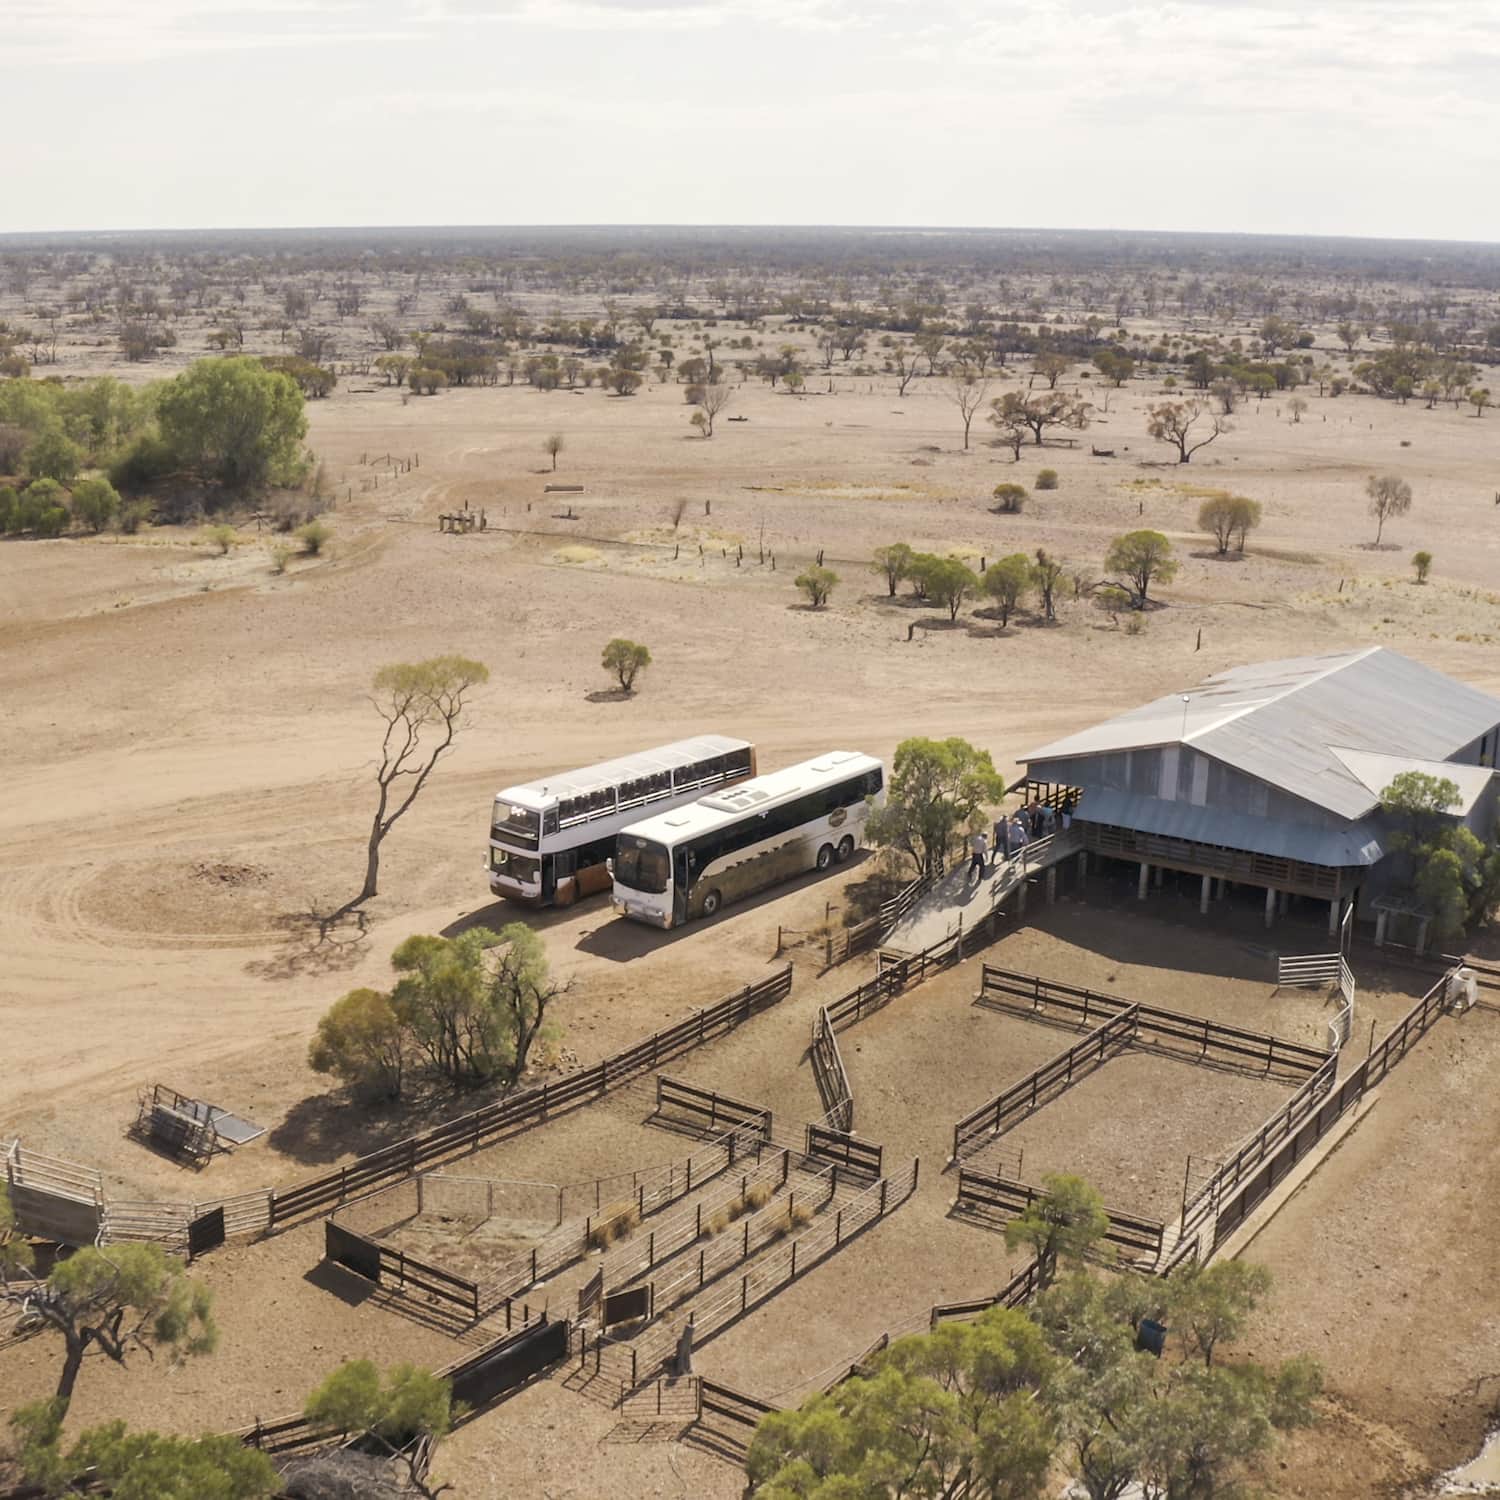 Aerial view of the Nogo Station shearing shed with two busses parked alongside